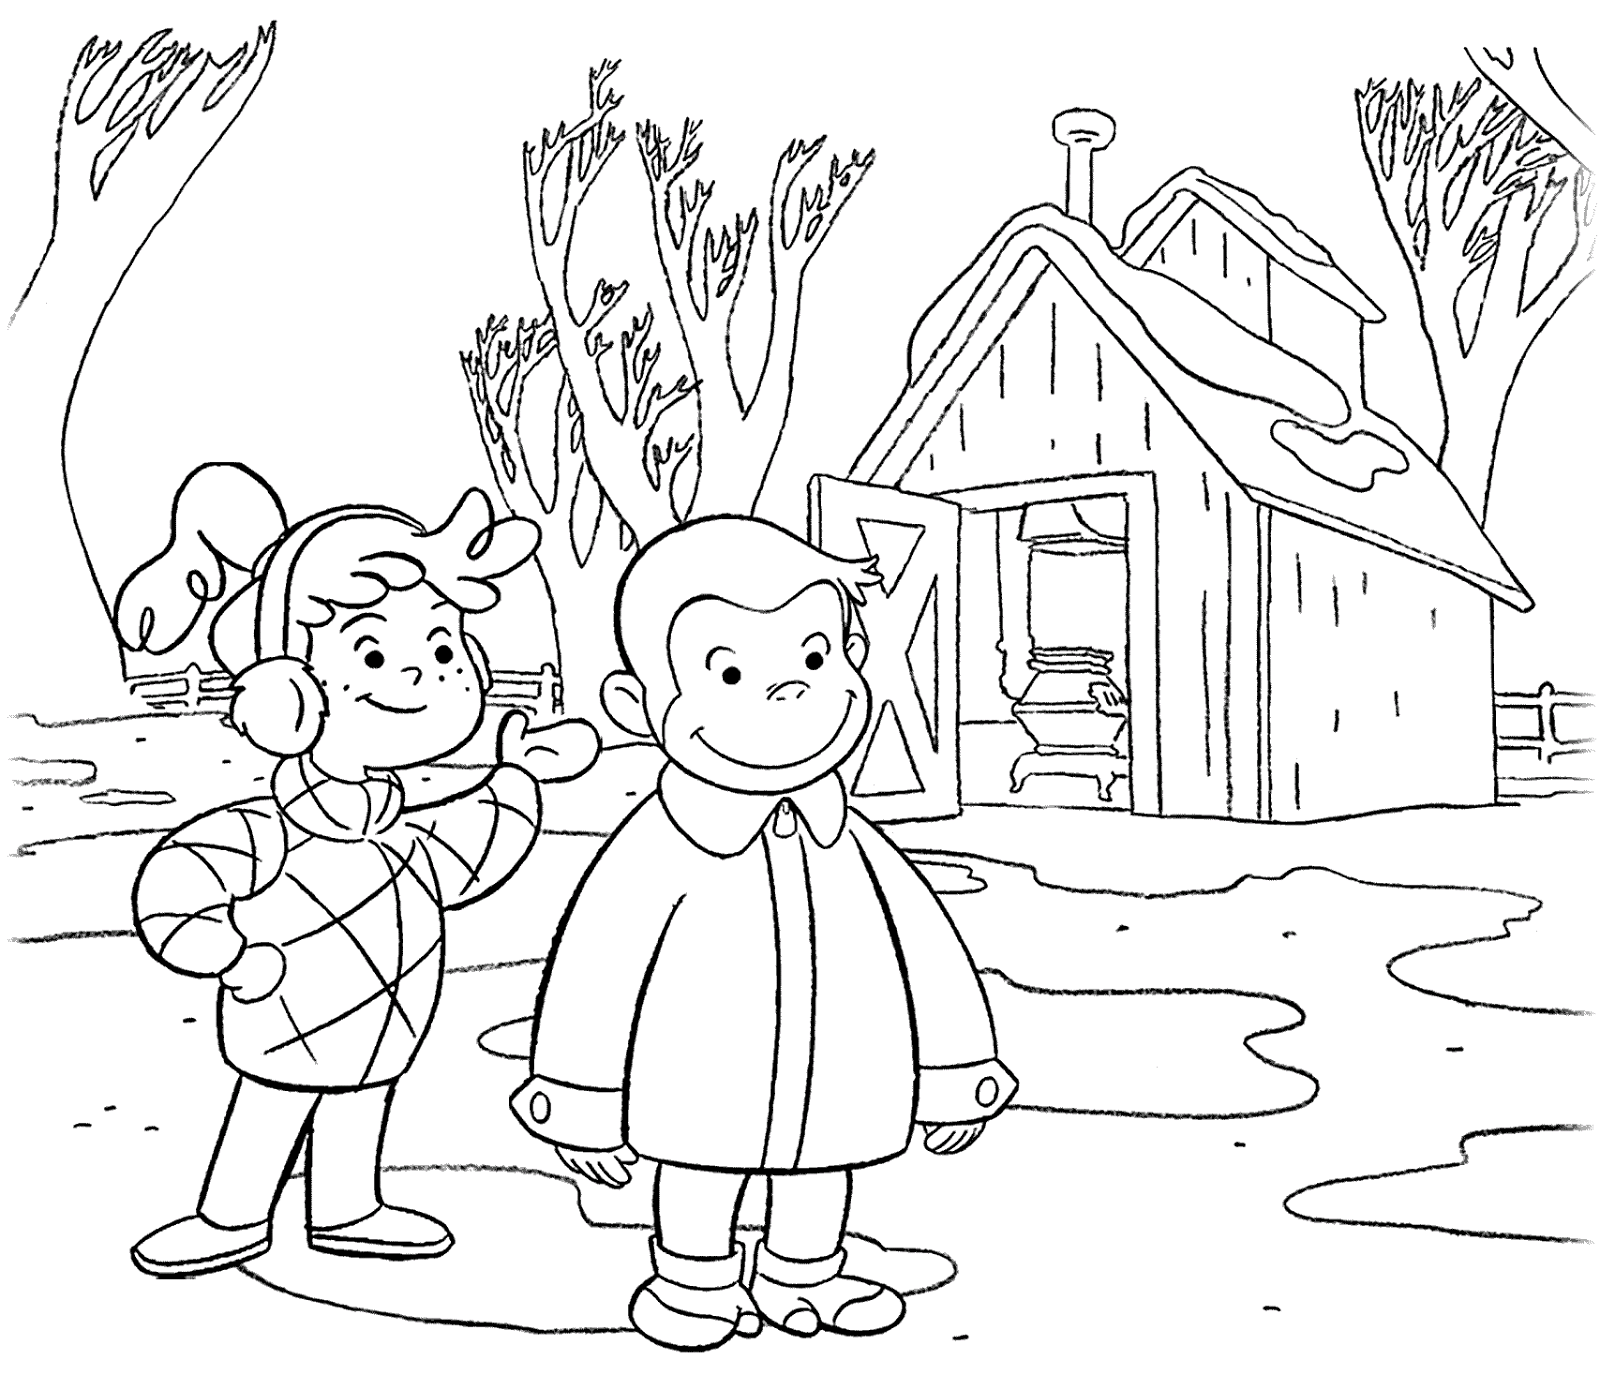 Curious George coloring pages for kids, printable | Anggela Coloring